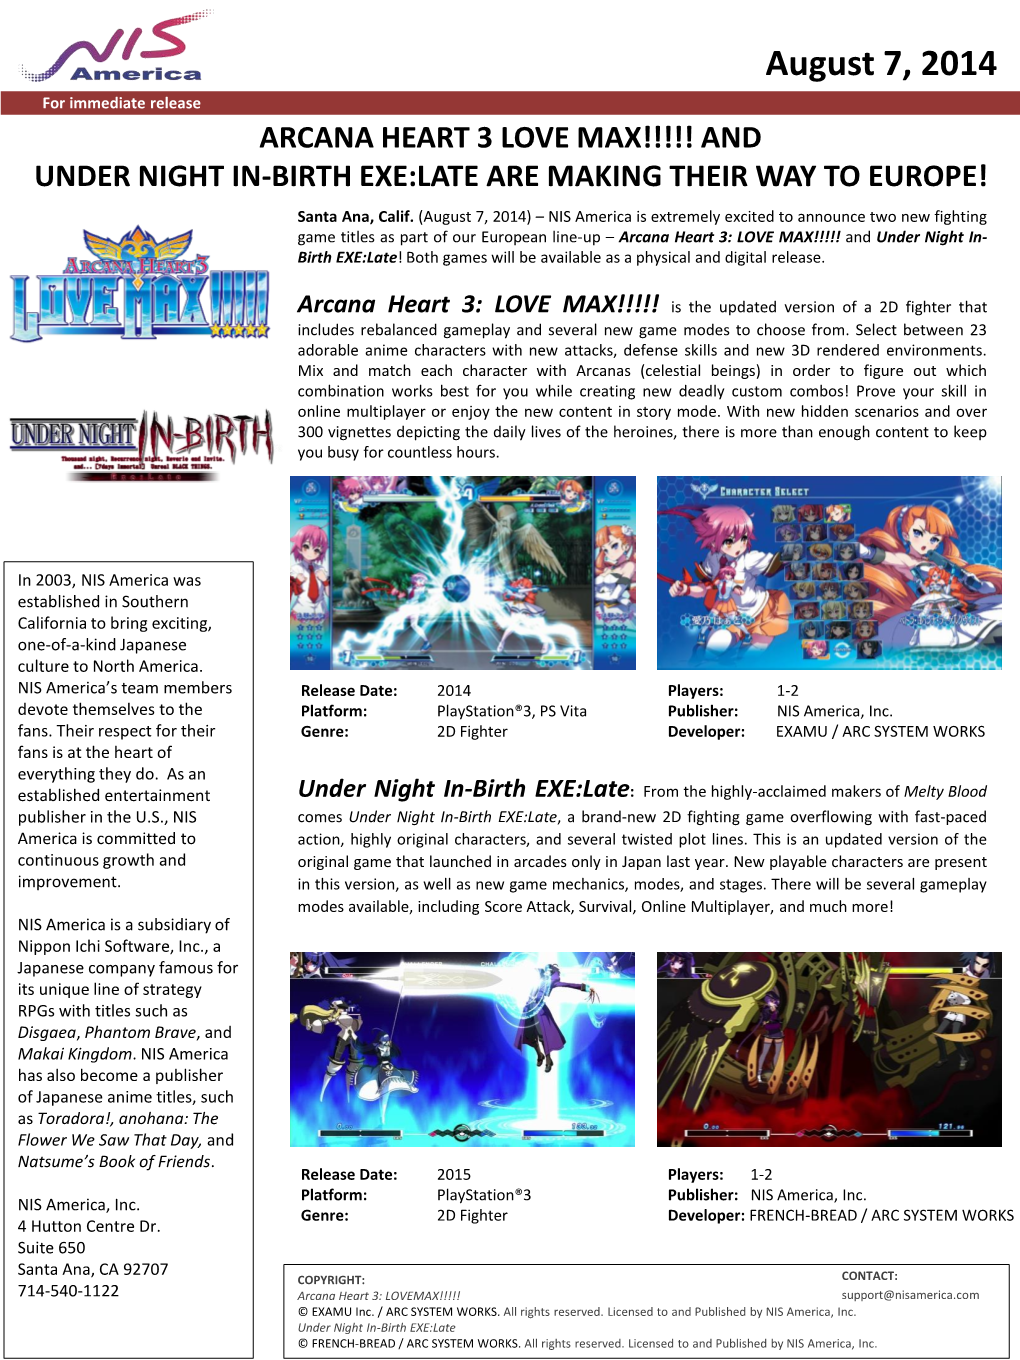 August 7, 2014 for Immediate Release ARCANA HEART 3 LOVE MAX!!!!! and UNDER NIGHT IN-BIRTH EXE:LATE ARE MAKING THEIR WAY to EUROPE! Santa Ana, Calif